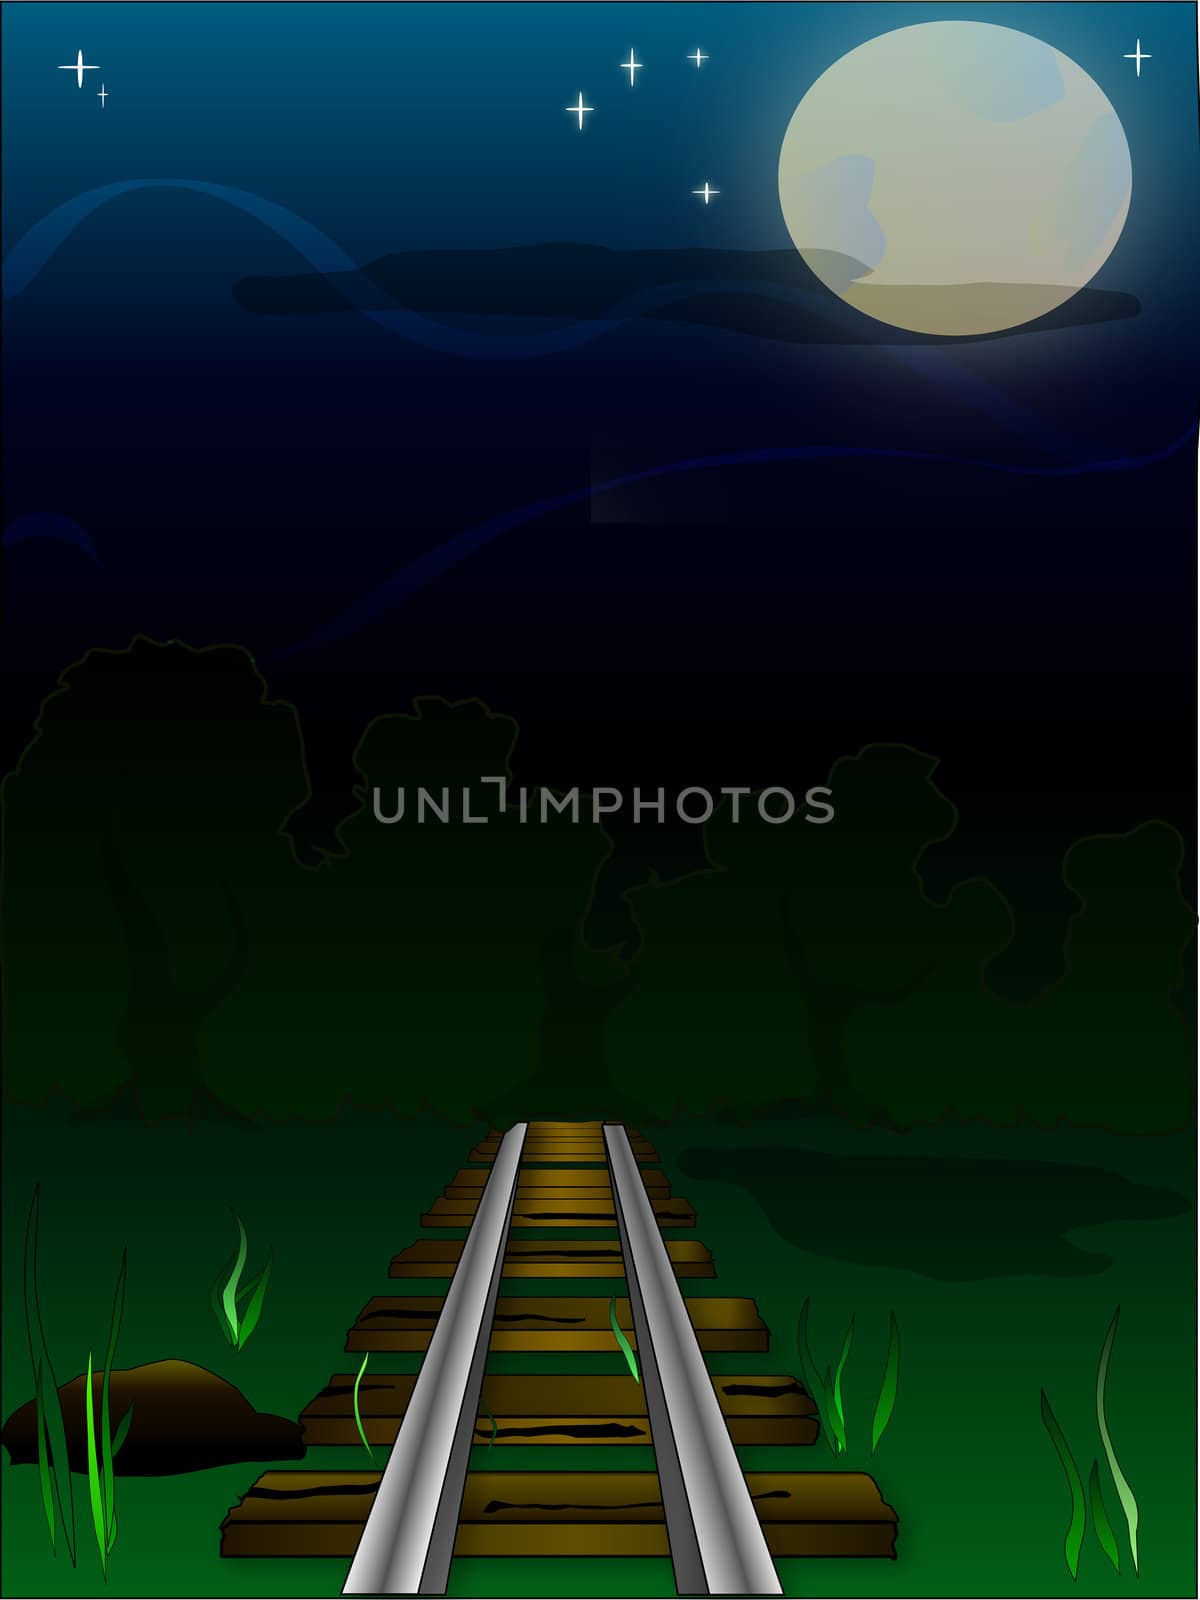 nocturnal lunar landscape with fleeing into the distance rails